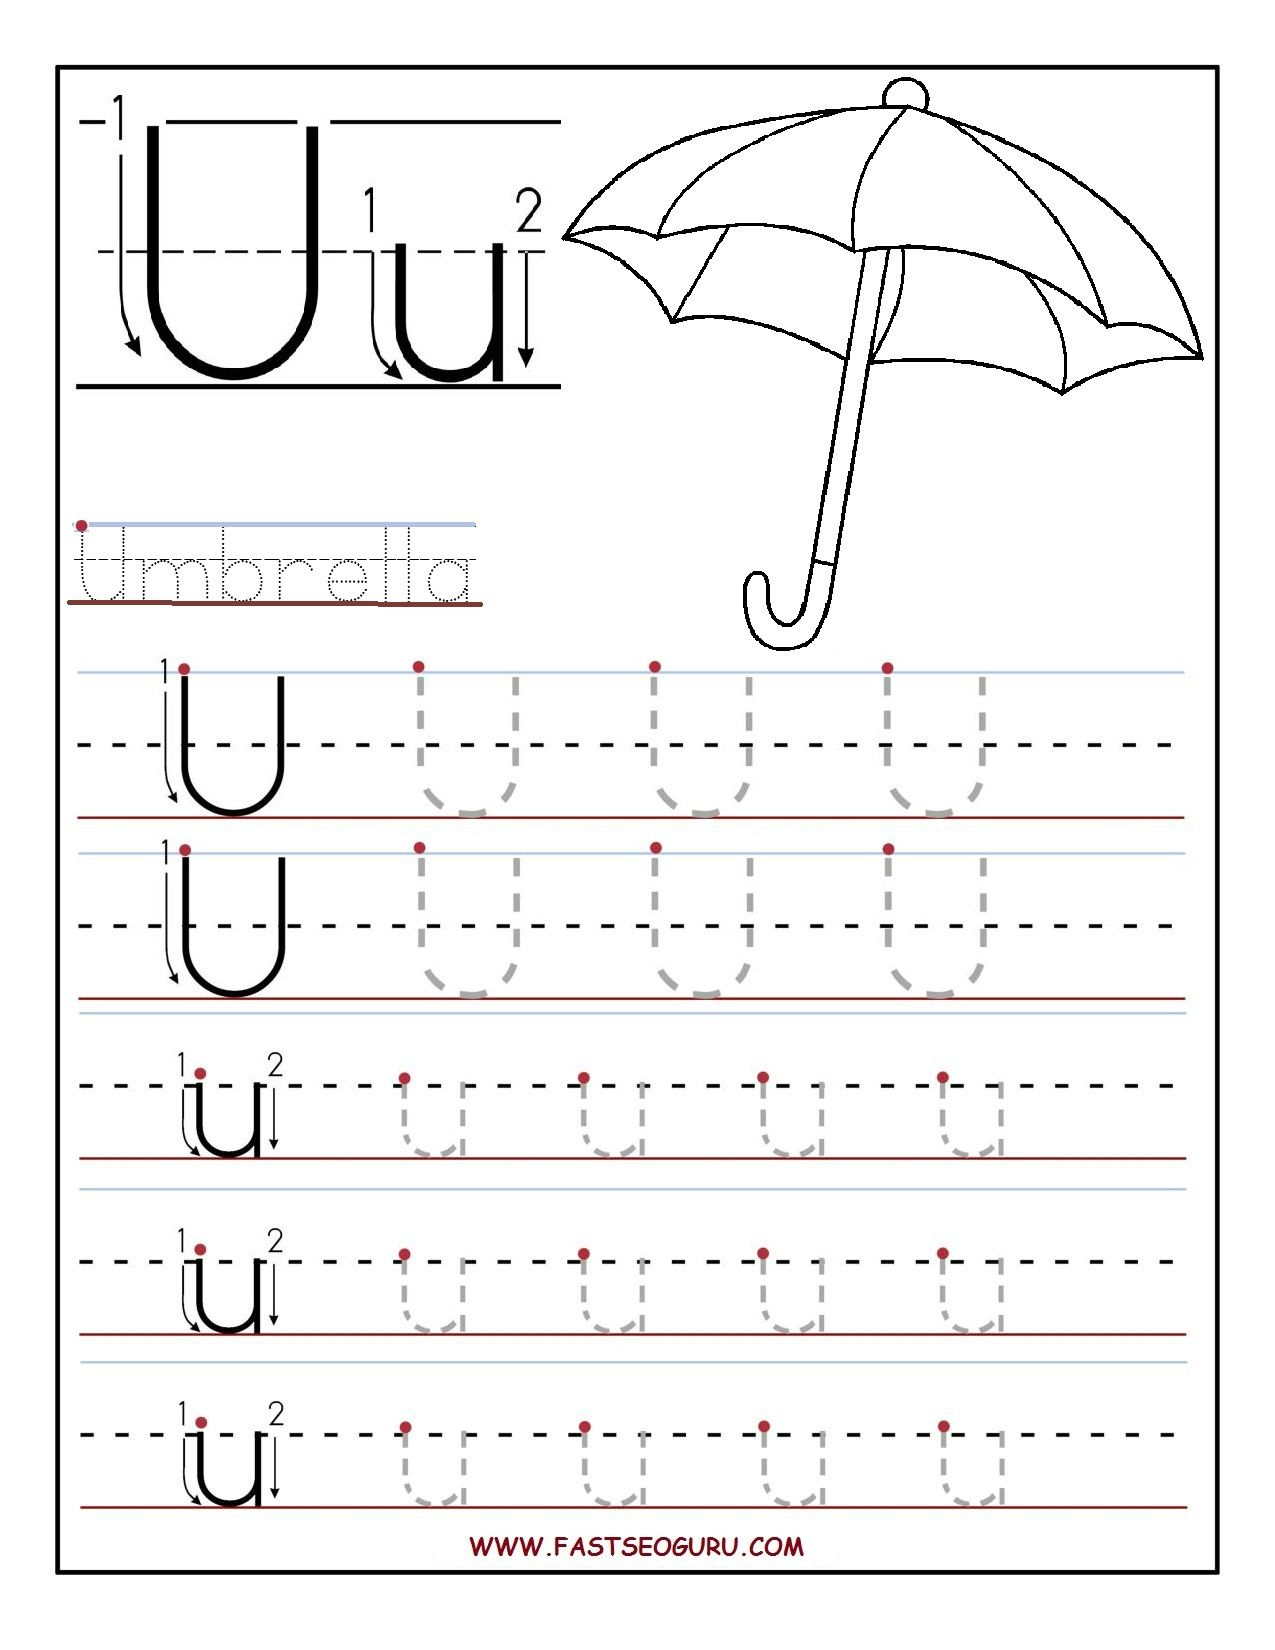 Printable Letter U Tracing Worksheets For Preschool with U Letter Tracing